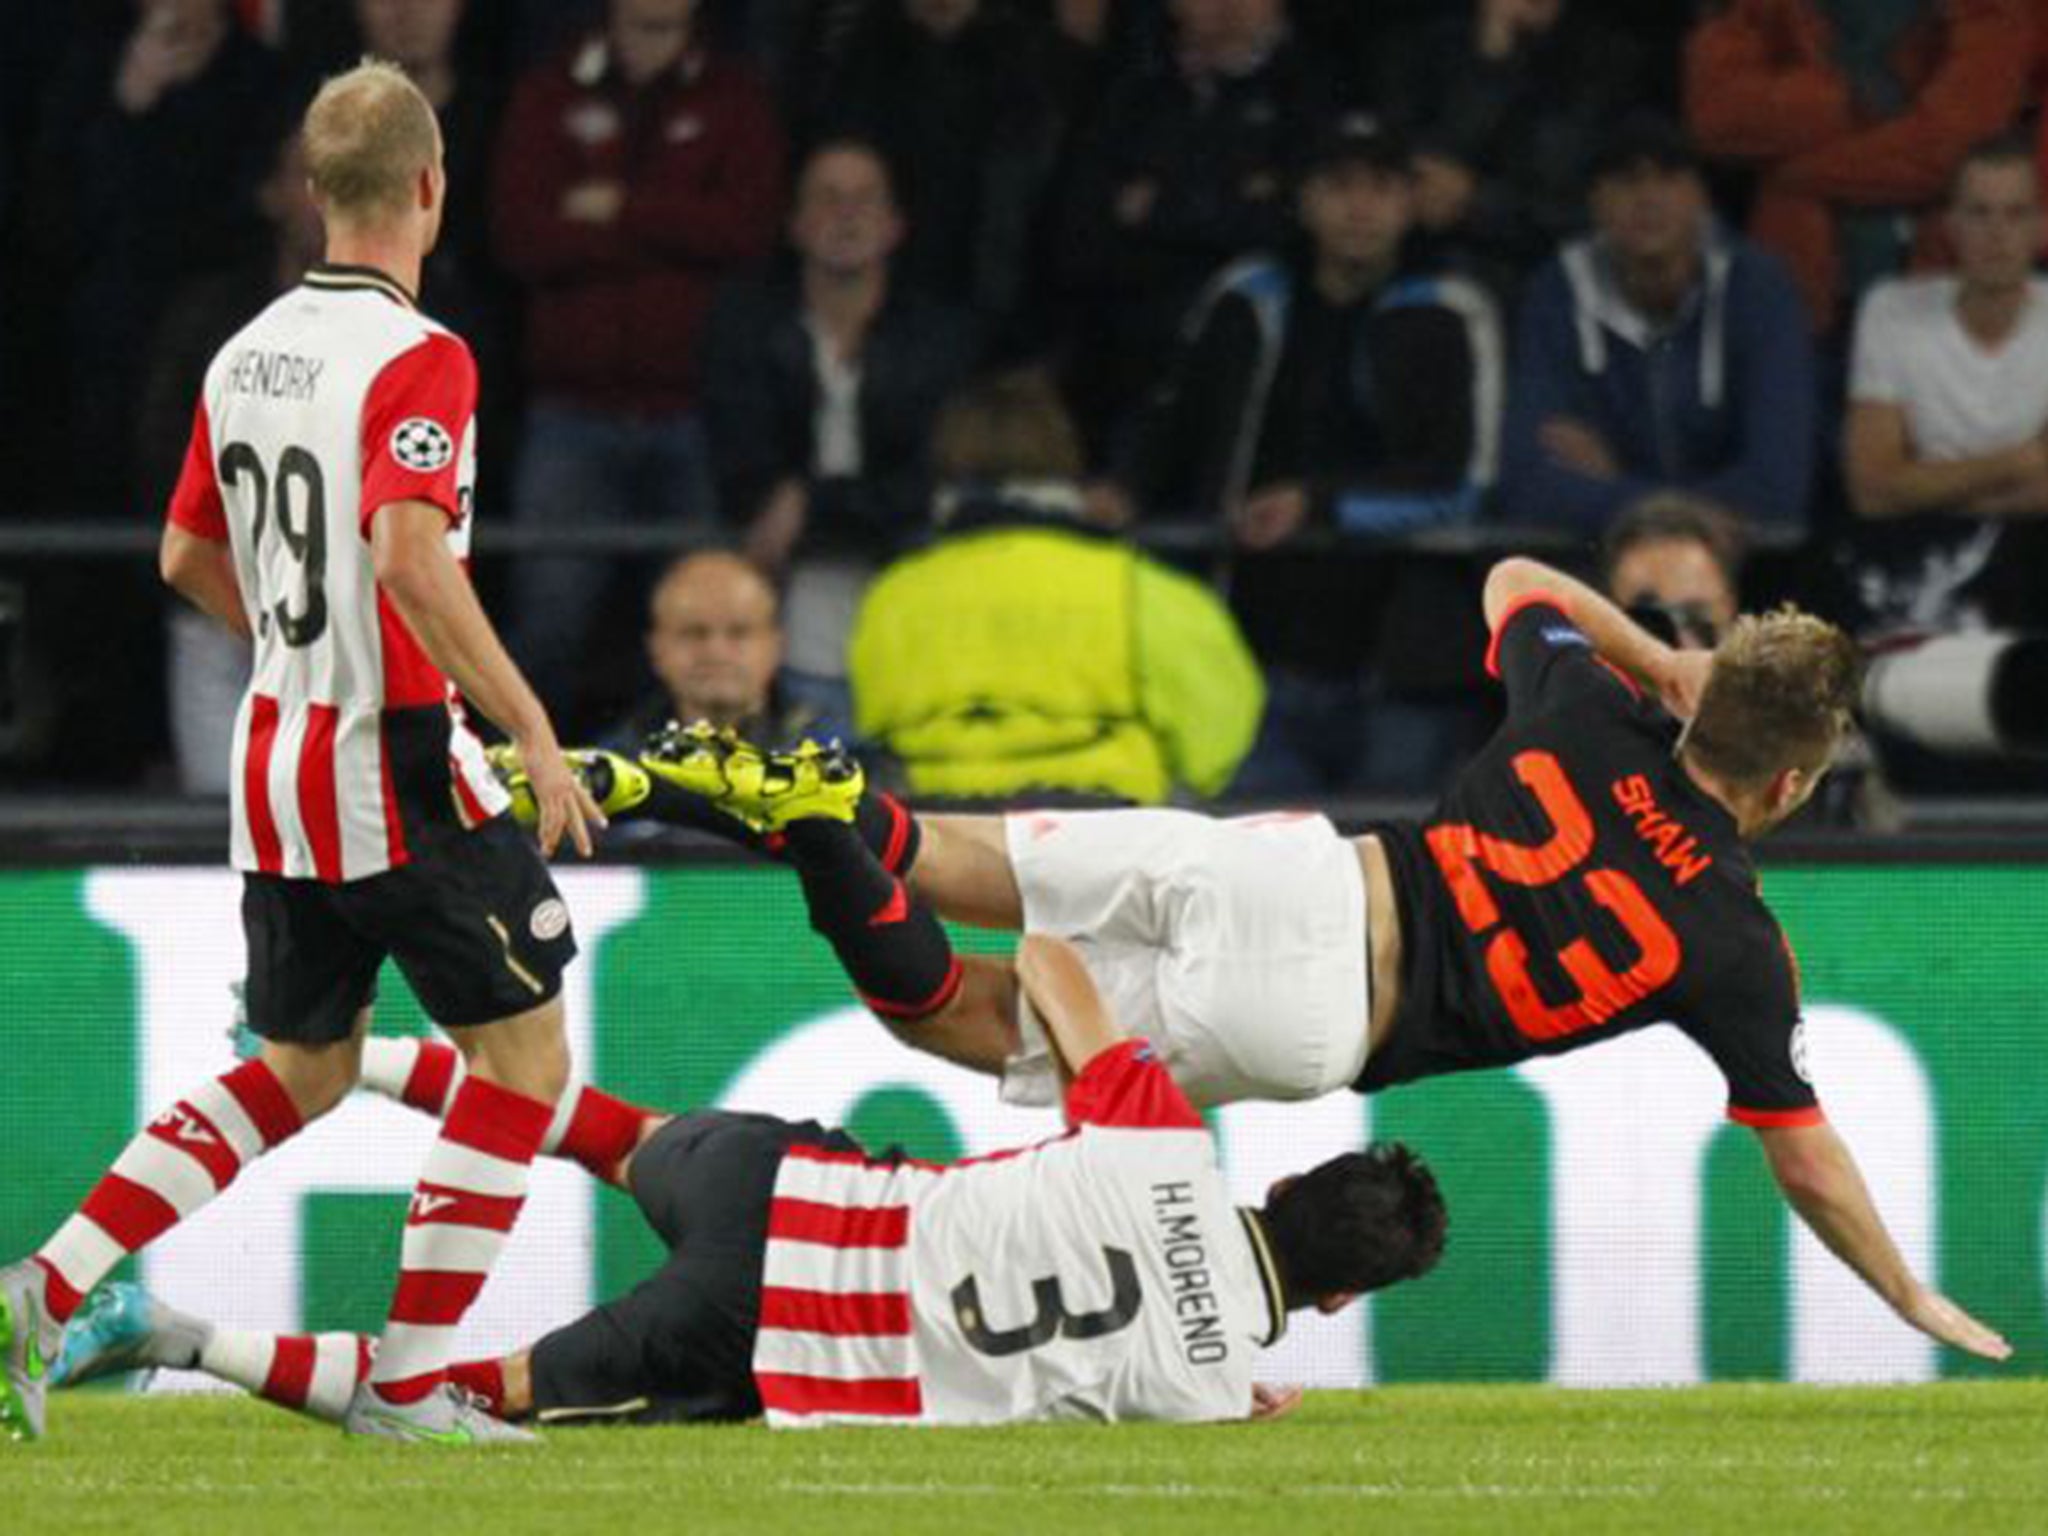 Hector Moreno clashes with Luke Shaw